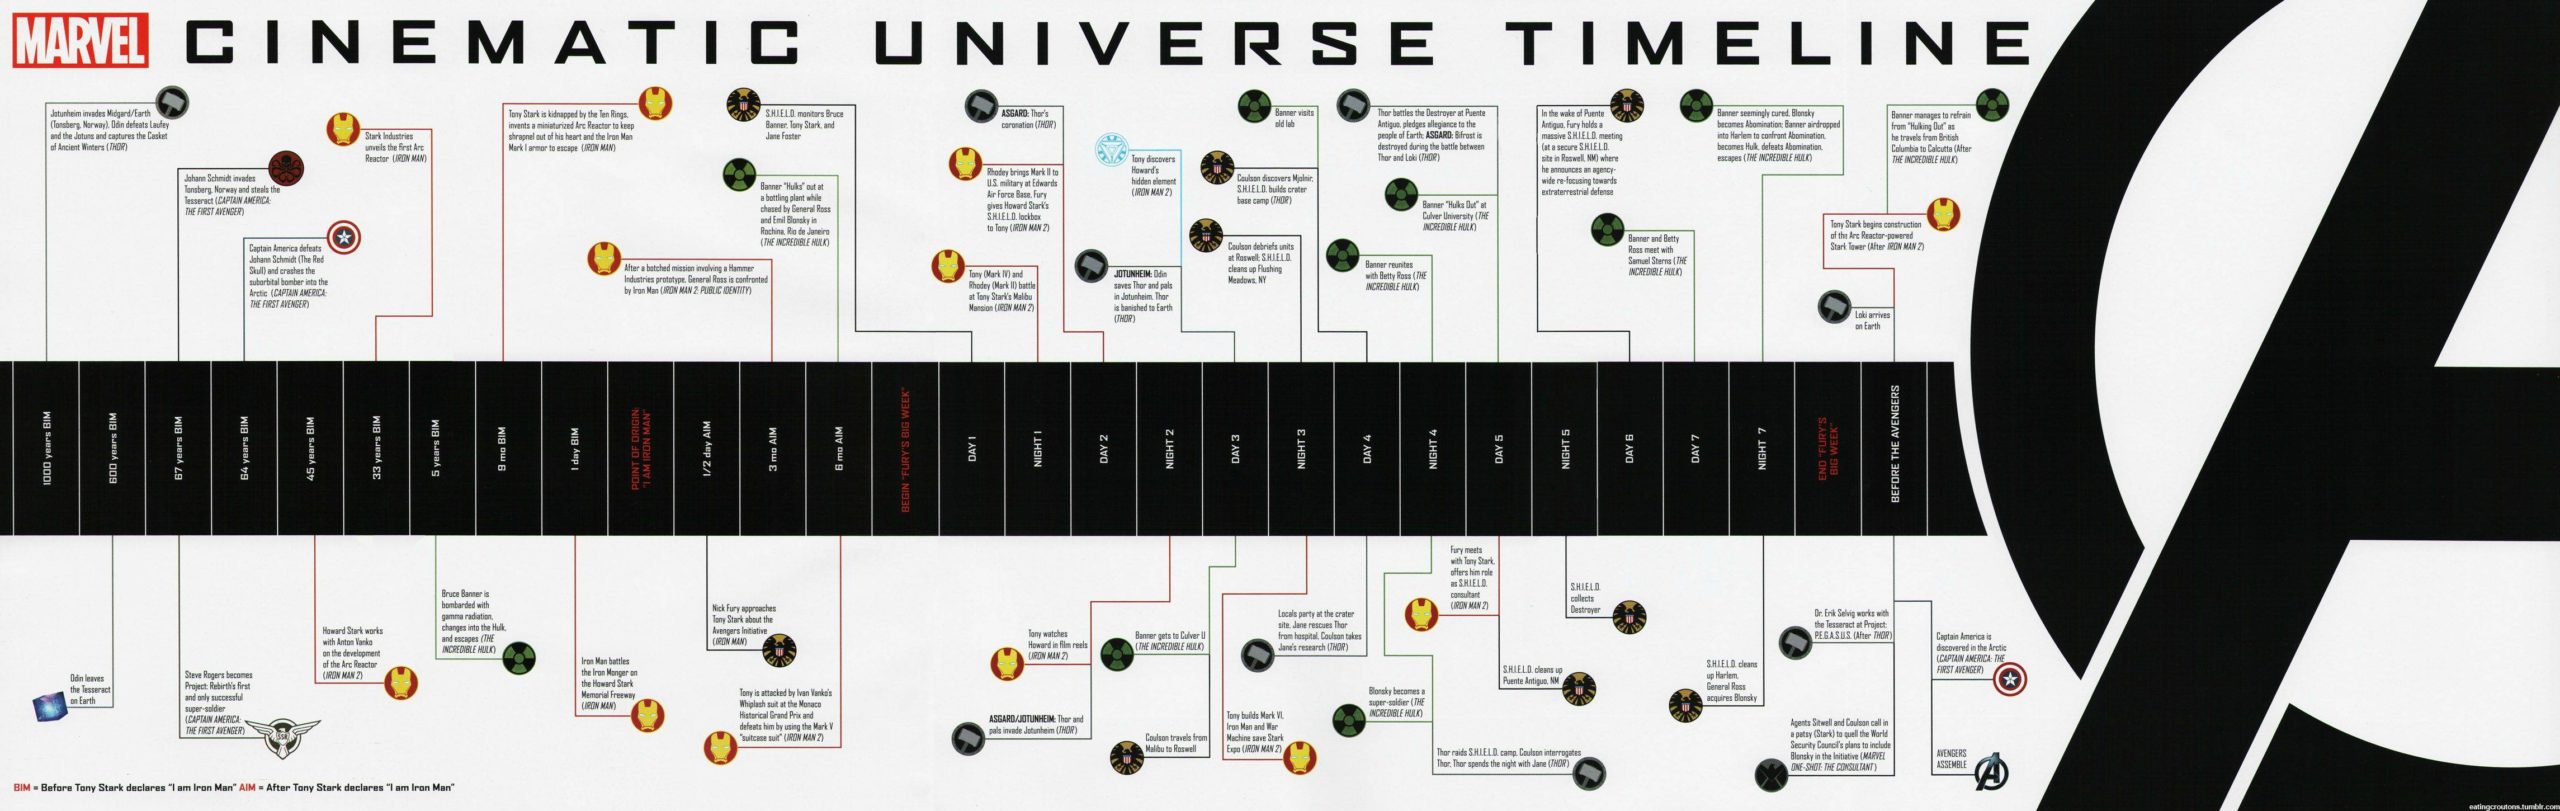 Will The Marvel Movies Timeline Ever Make Sense?